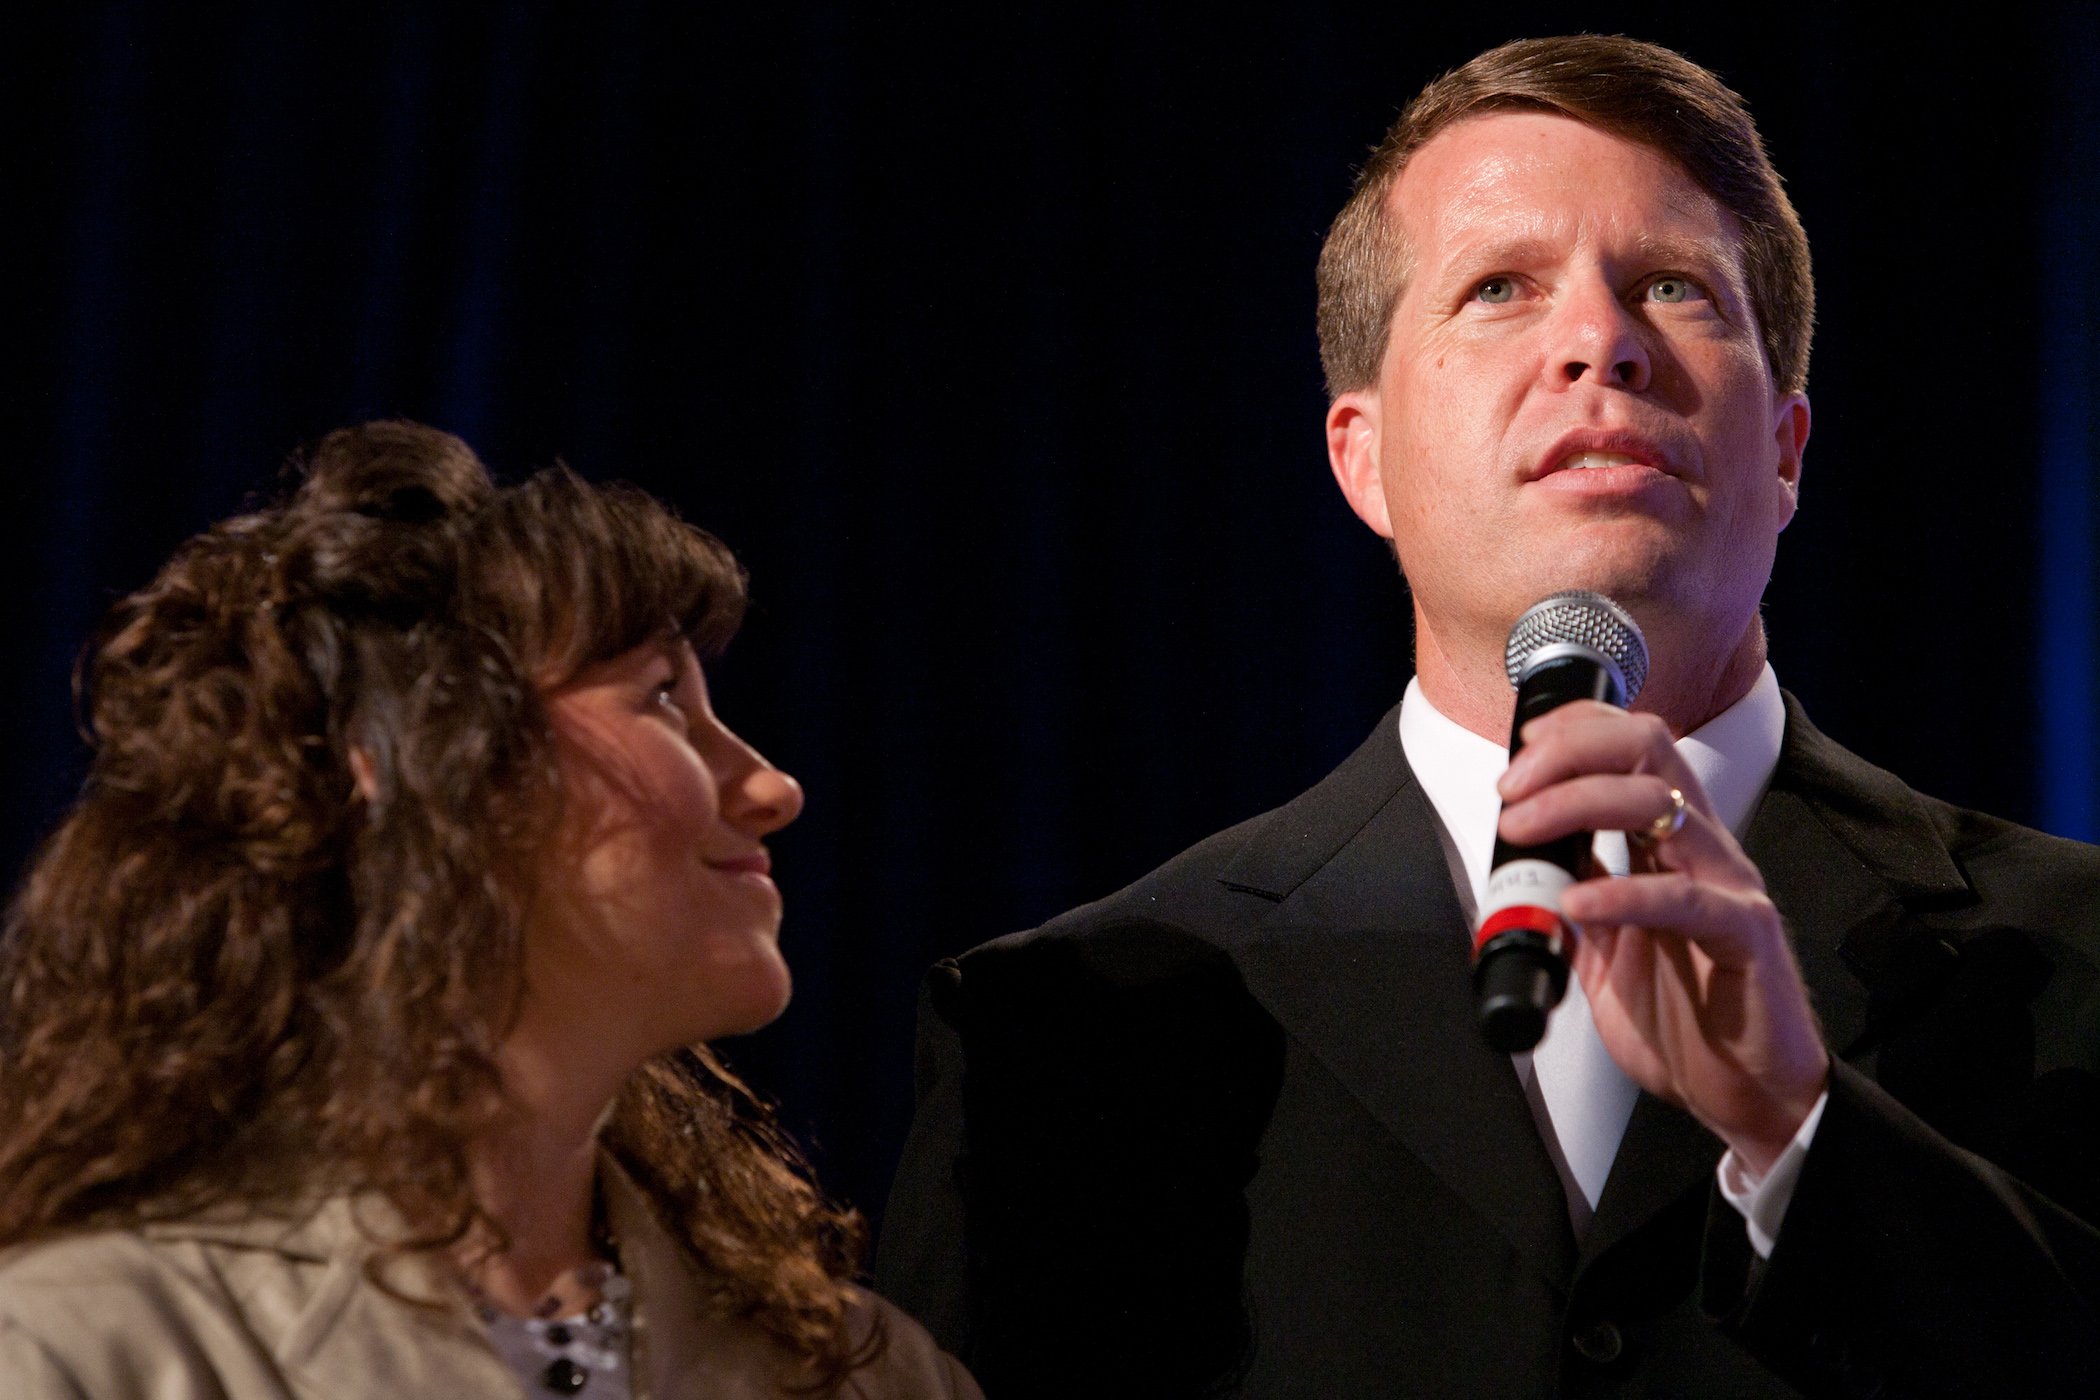 Michelle and Jim Bob Duggar from the Duggar family of TLC's 'Counting On' speaking at an event against a black background